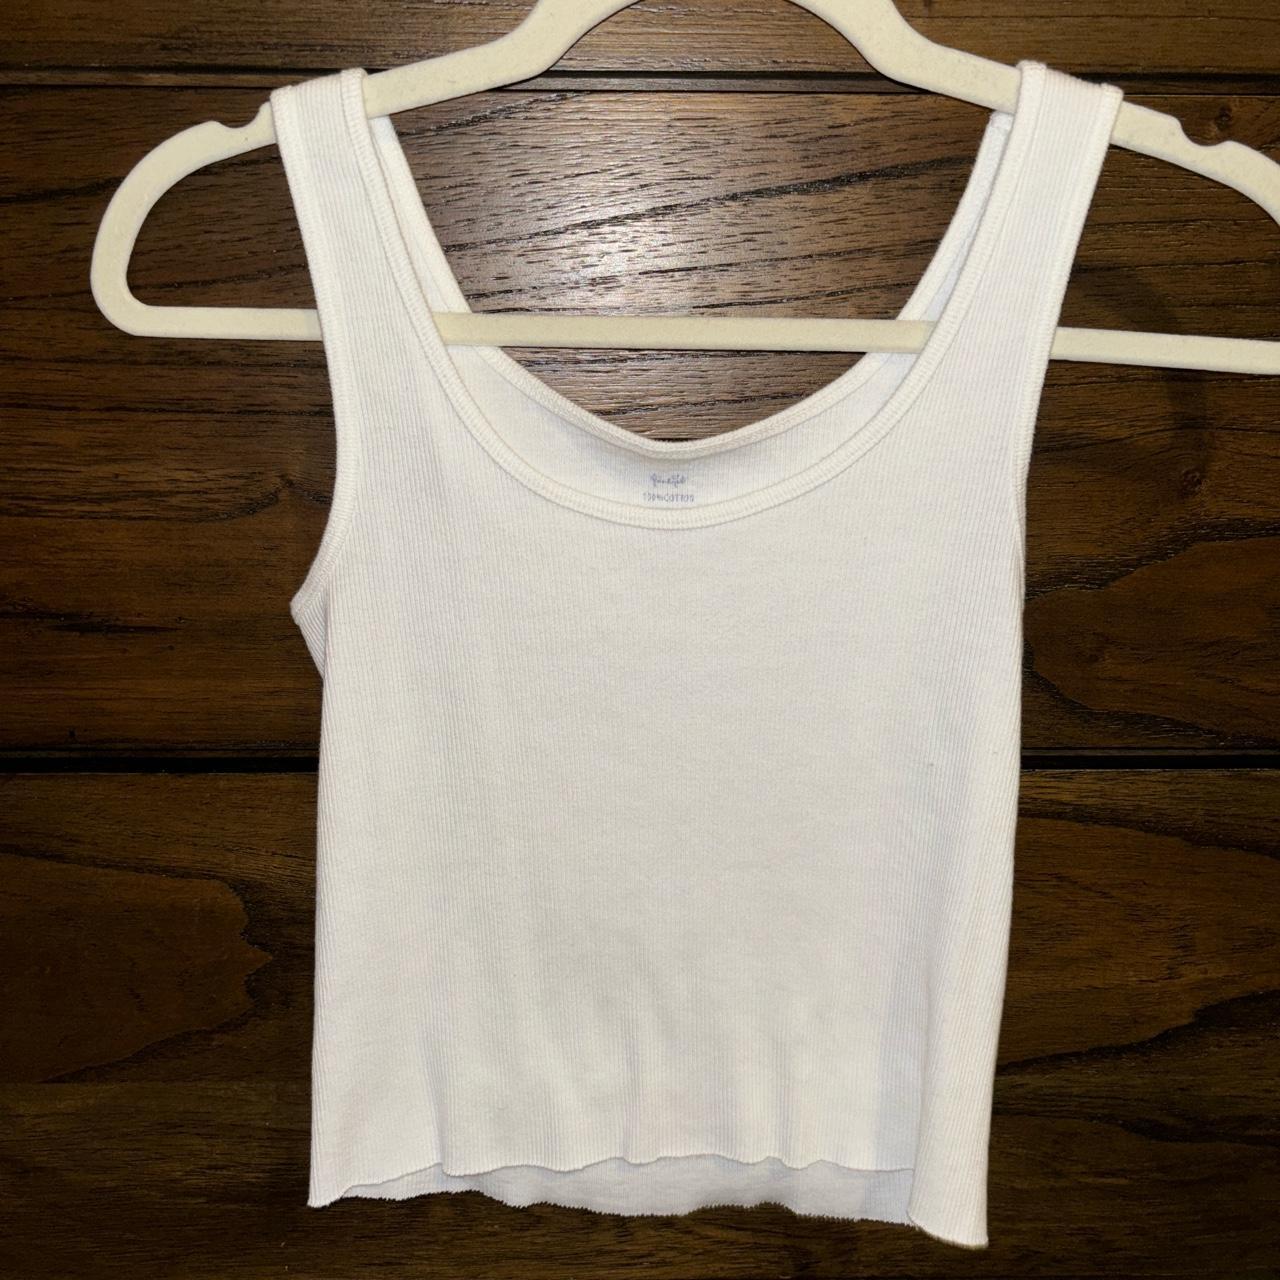 Brandy Melville Sheena Tank Top Gray - $15 New With Tags - From Seven